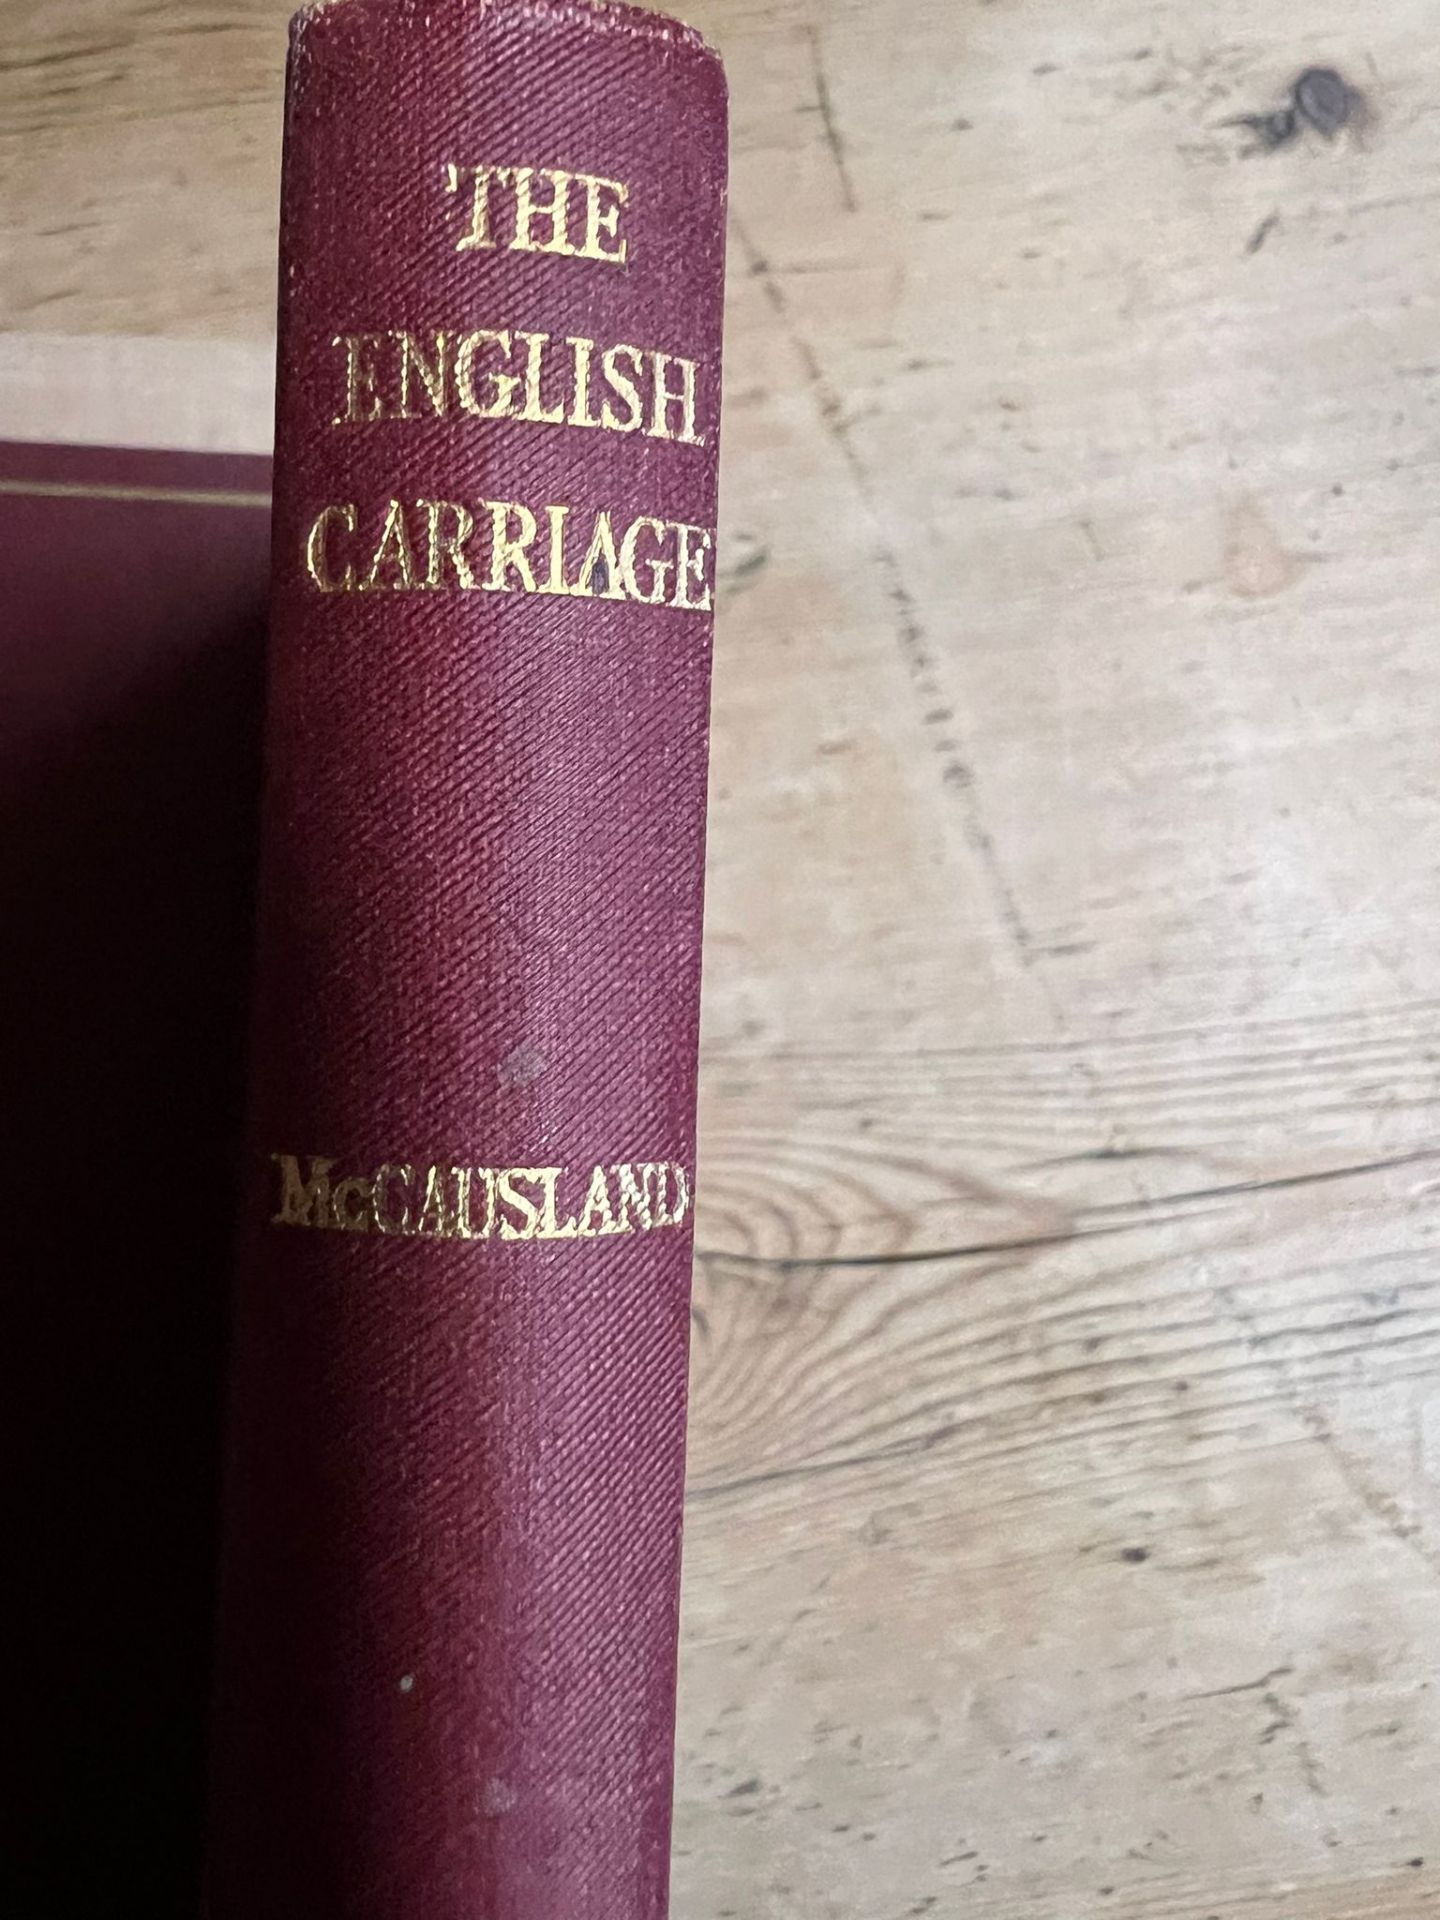 The English Carriage by McCausland and Driving Lessons by E. Howlett - Image 2 of 2